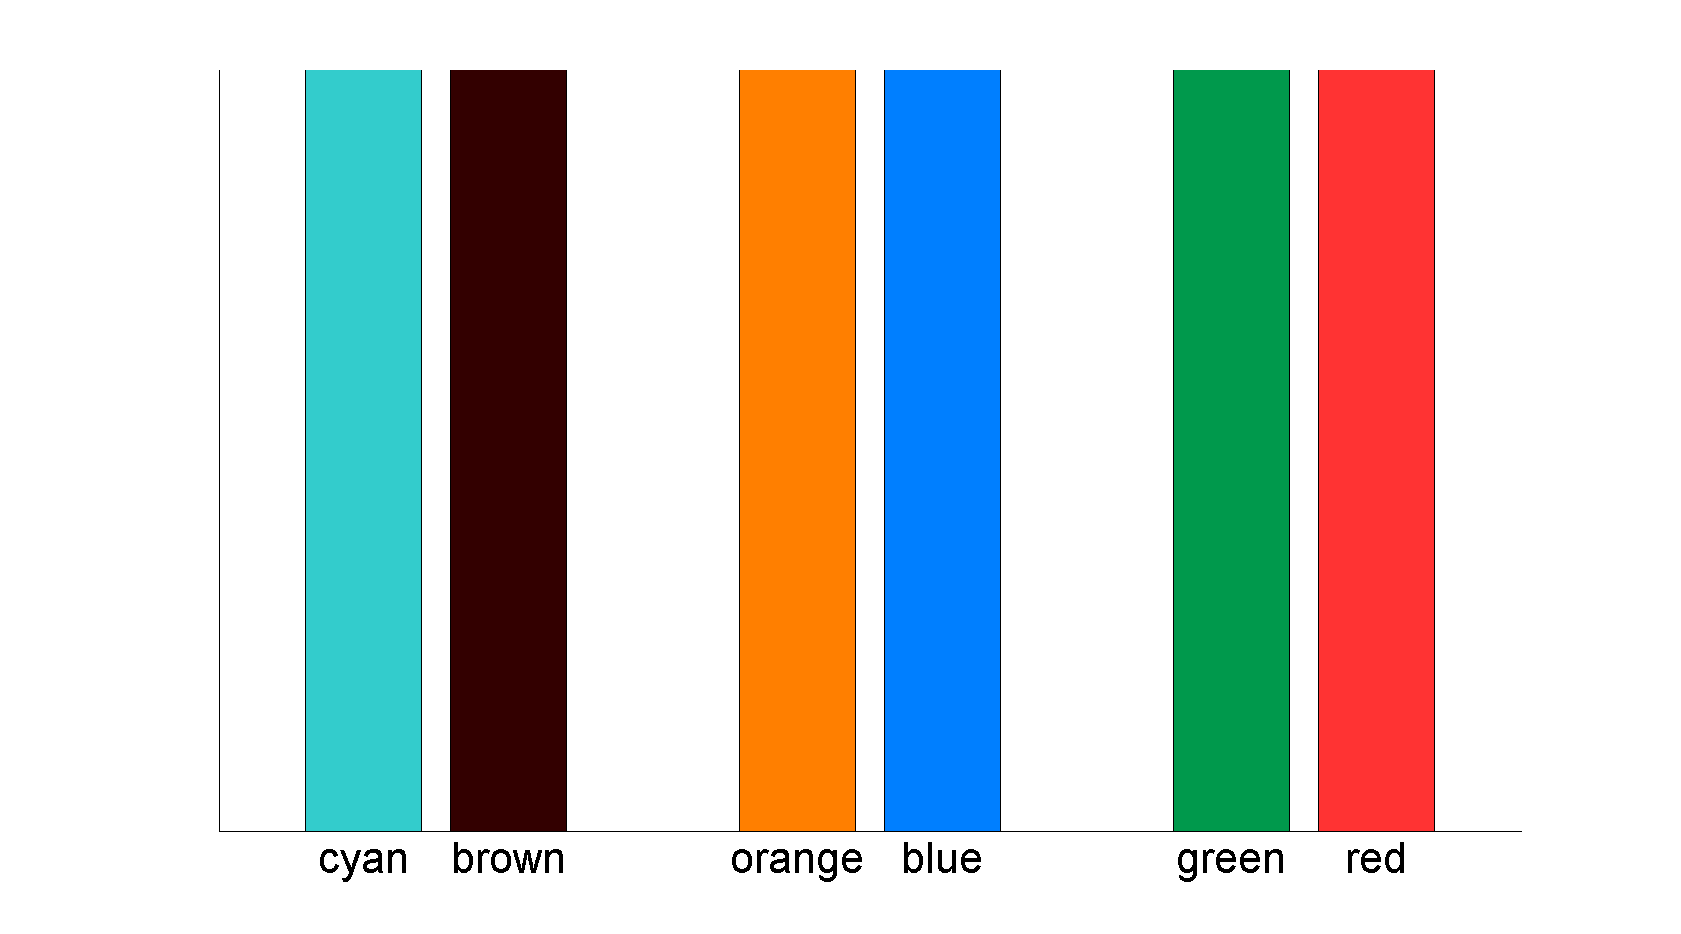 Matlab colors. A few ready-to-use codes for colors in… | by L